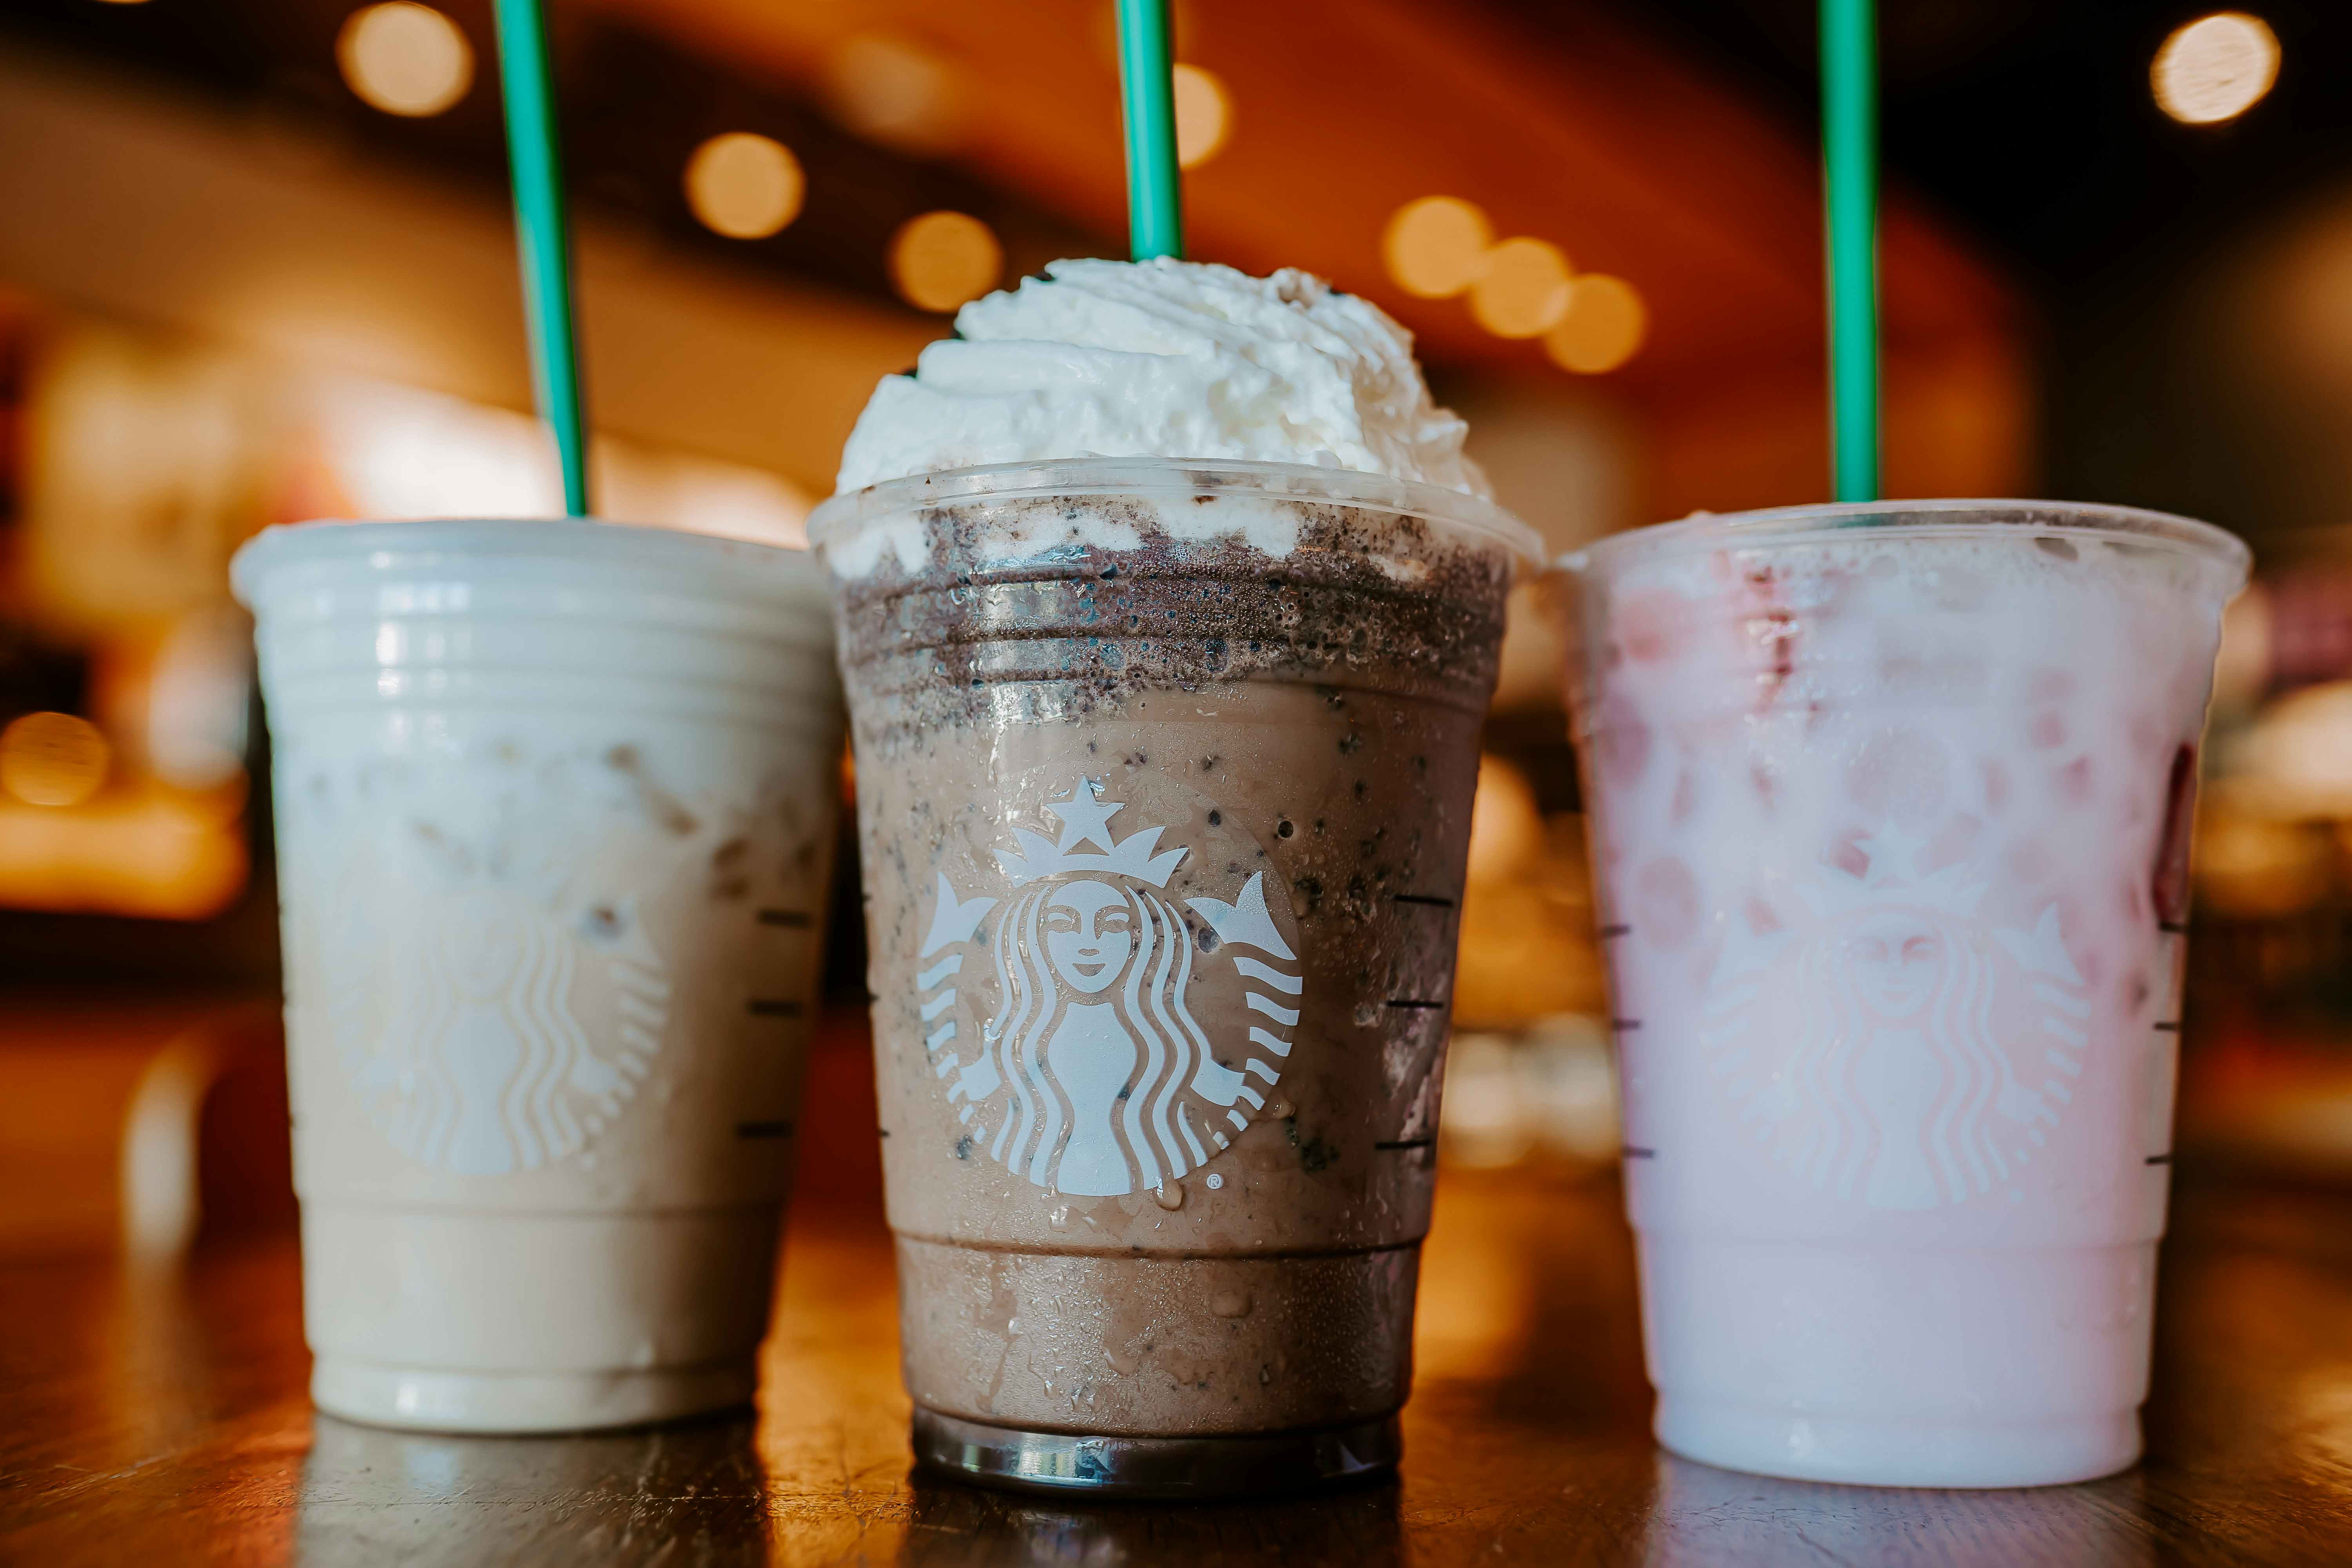  Starbucks Offers + Discounts: Get Half Off ALL Drinks Today from Noon - 6 p.m.!